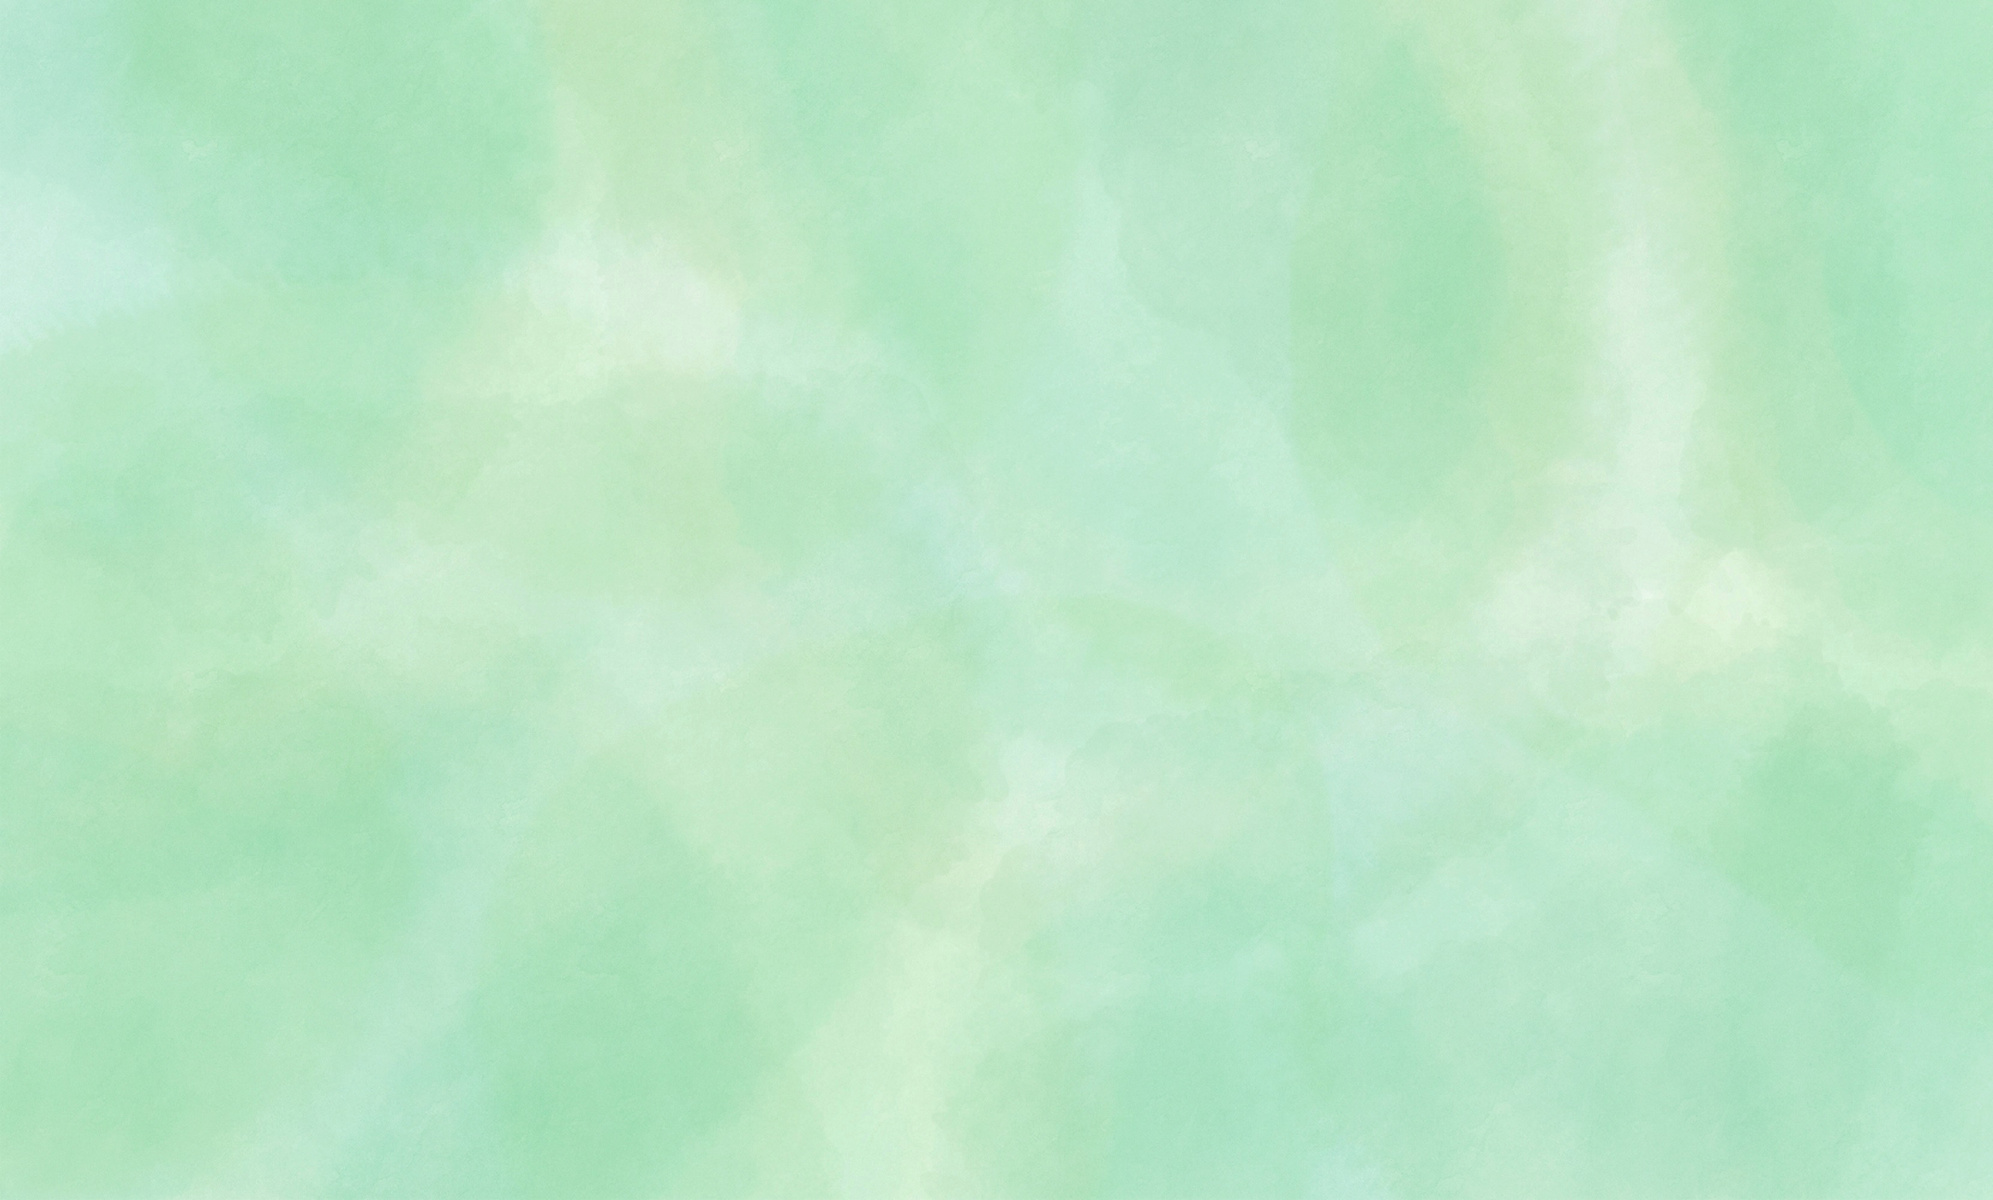 Watercolor Background - Mint Green